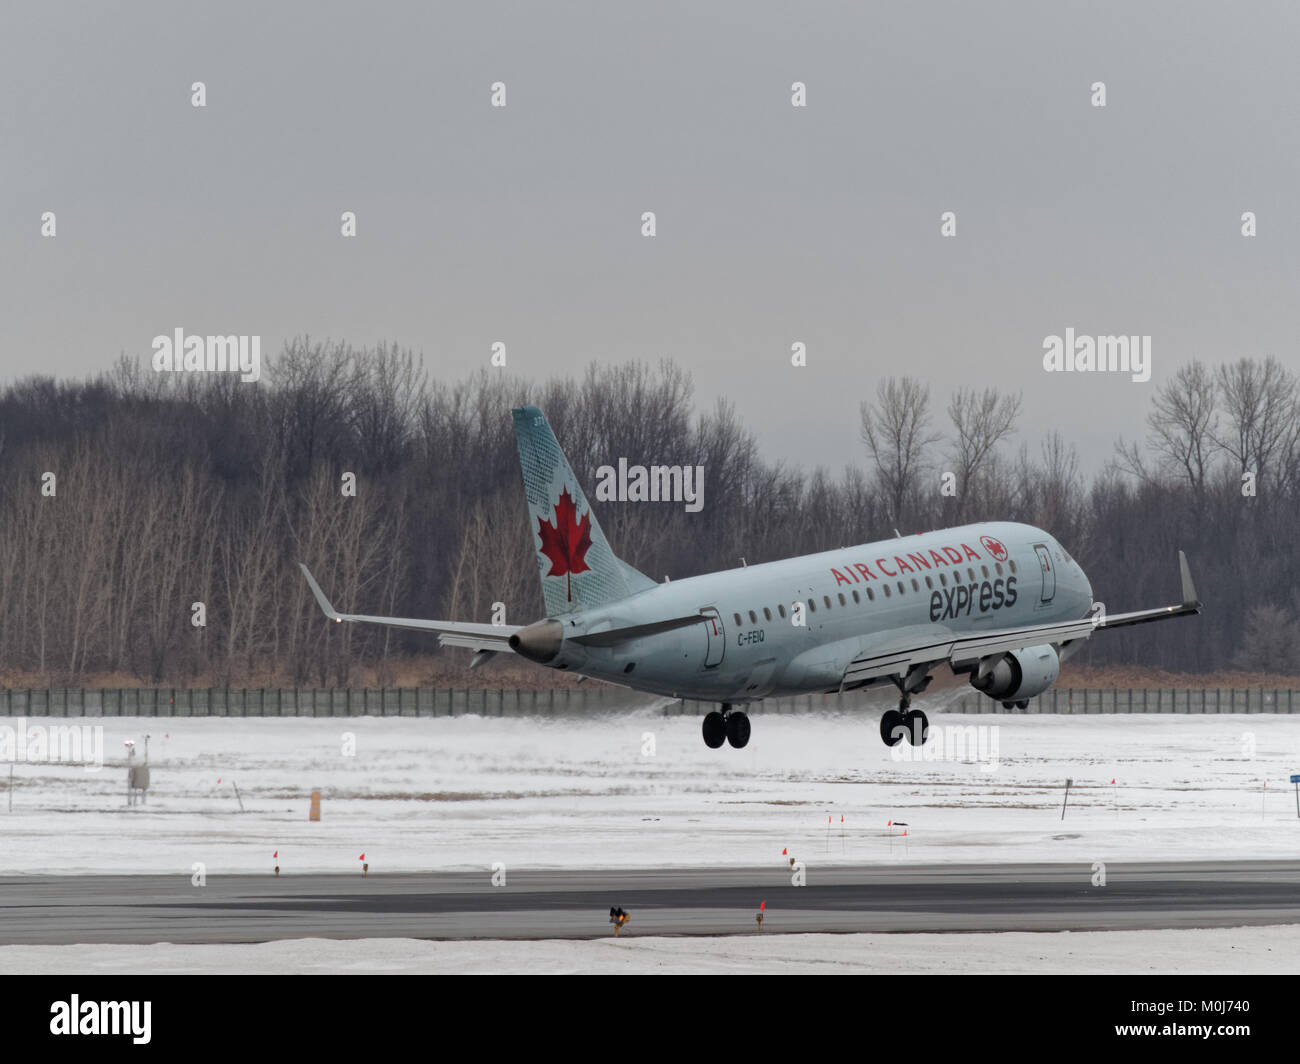 An Air Canada Embraer erj 175su landing at YUL international airport in Dorval,Quebec Stock Photo